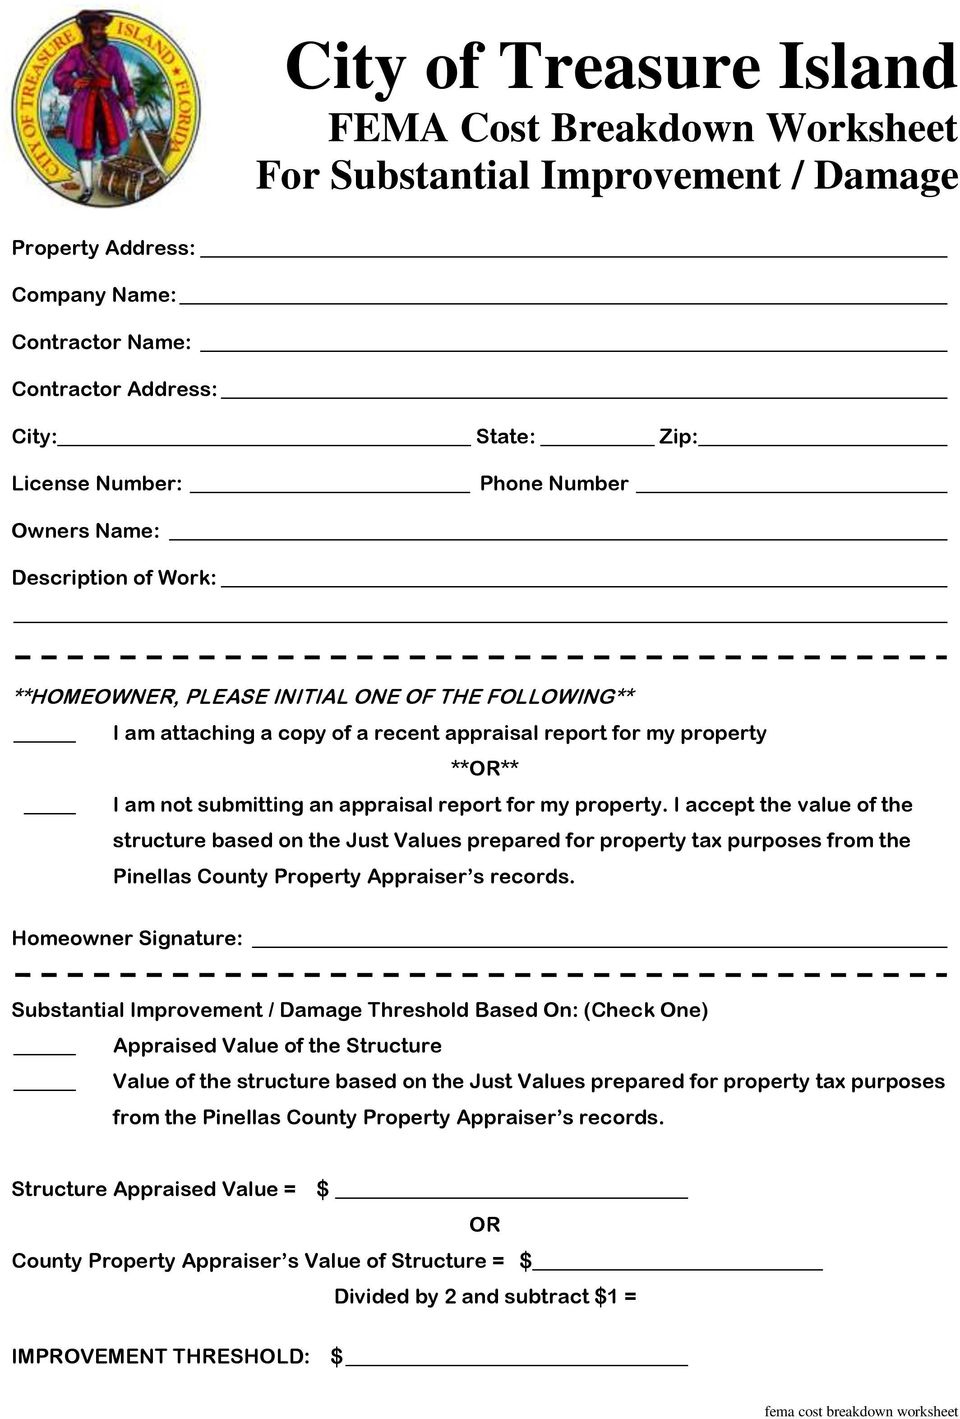 report for my property. I accept the value of the structure based on the Just Values prepared for property tax purposes from the Pinellas County Property Appraiser s records.